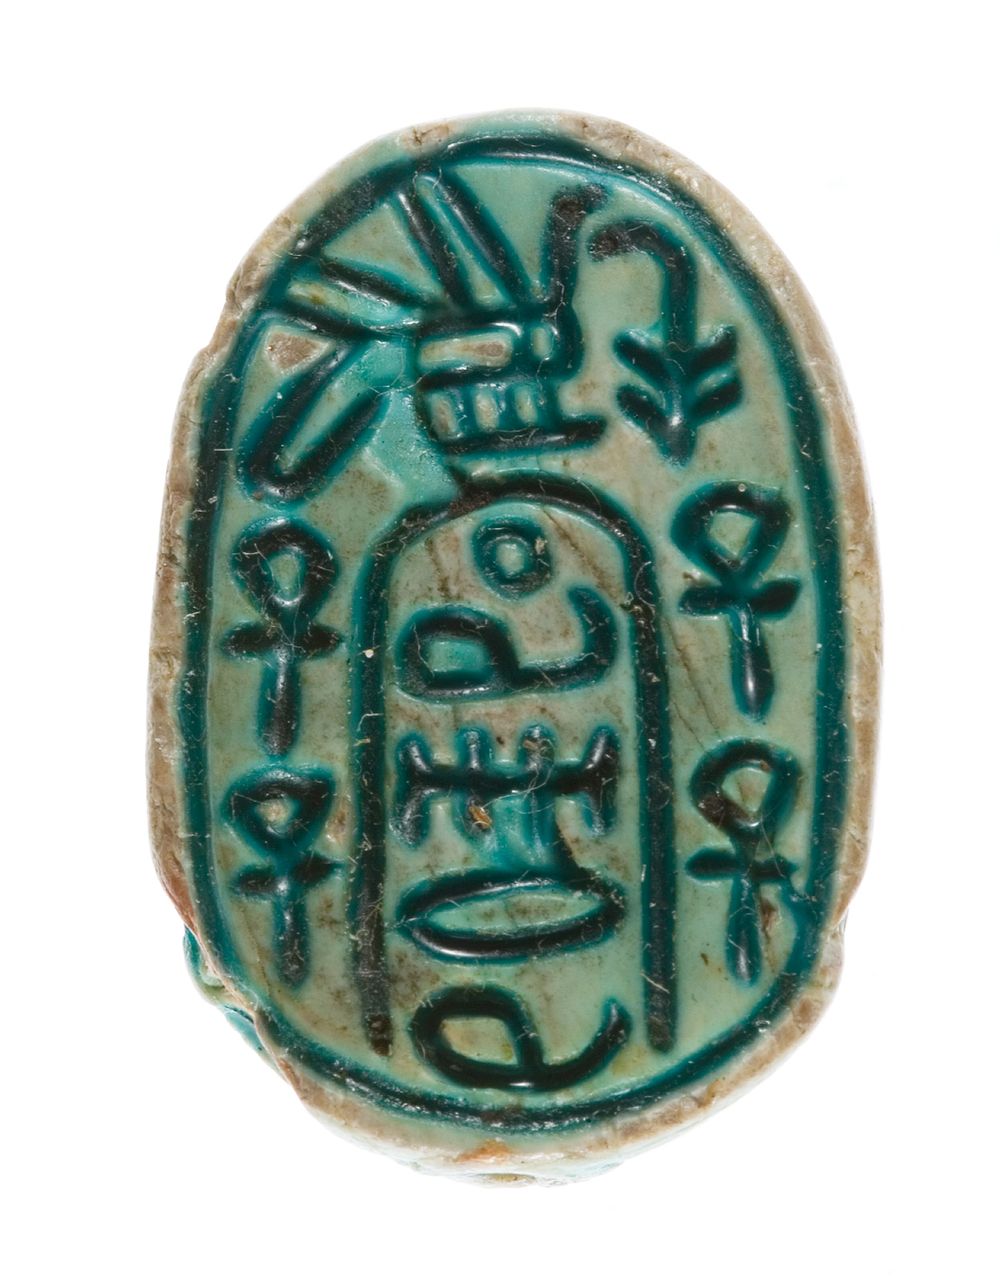 Canaanite Scarab of the "Anra" Type